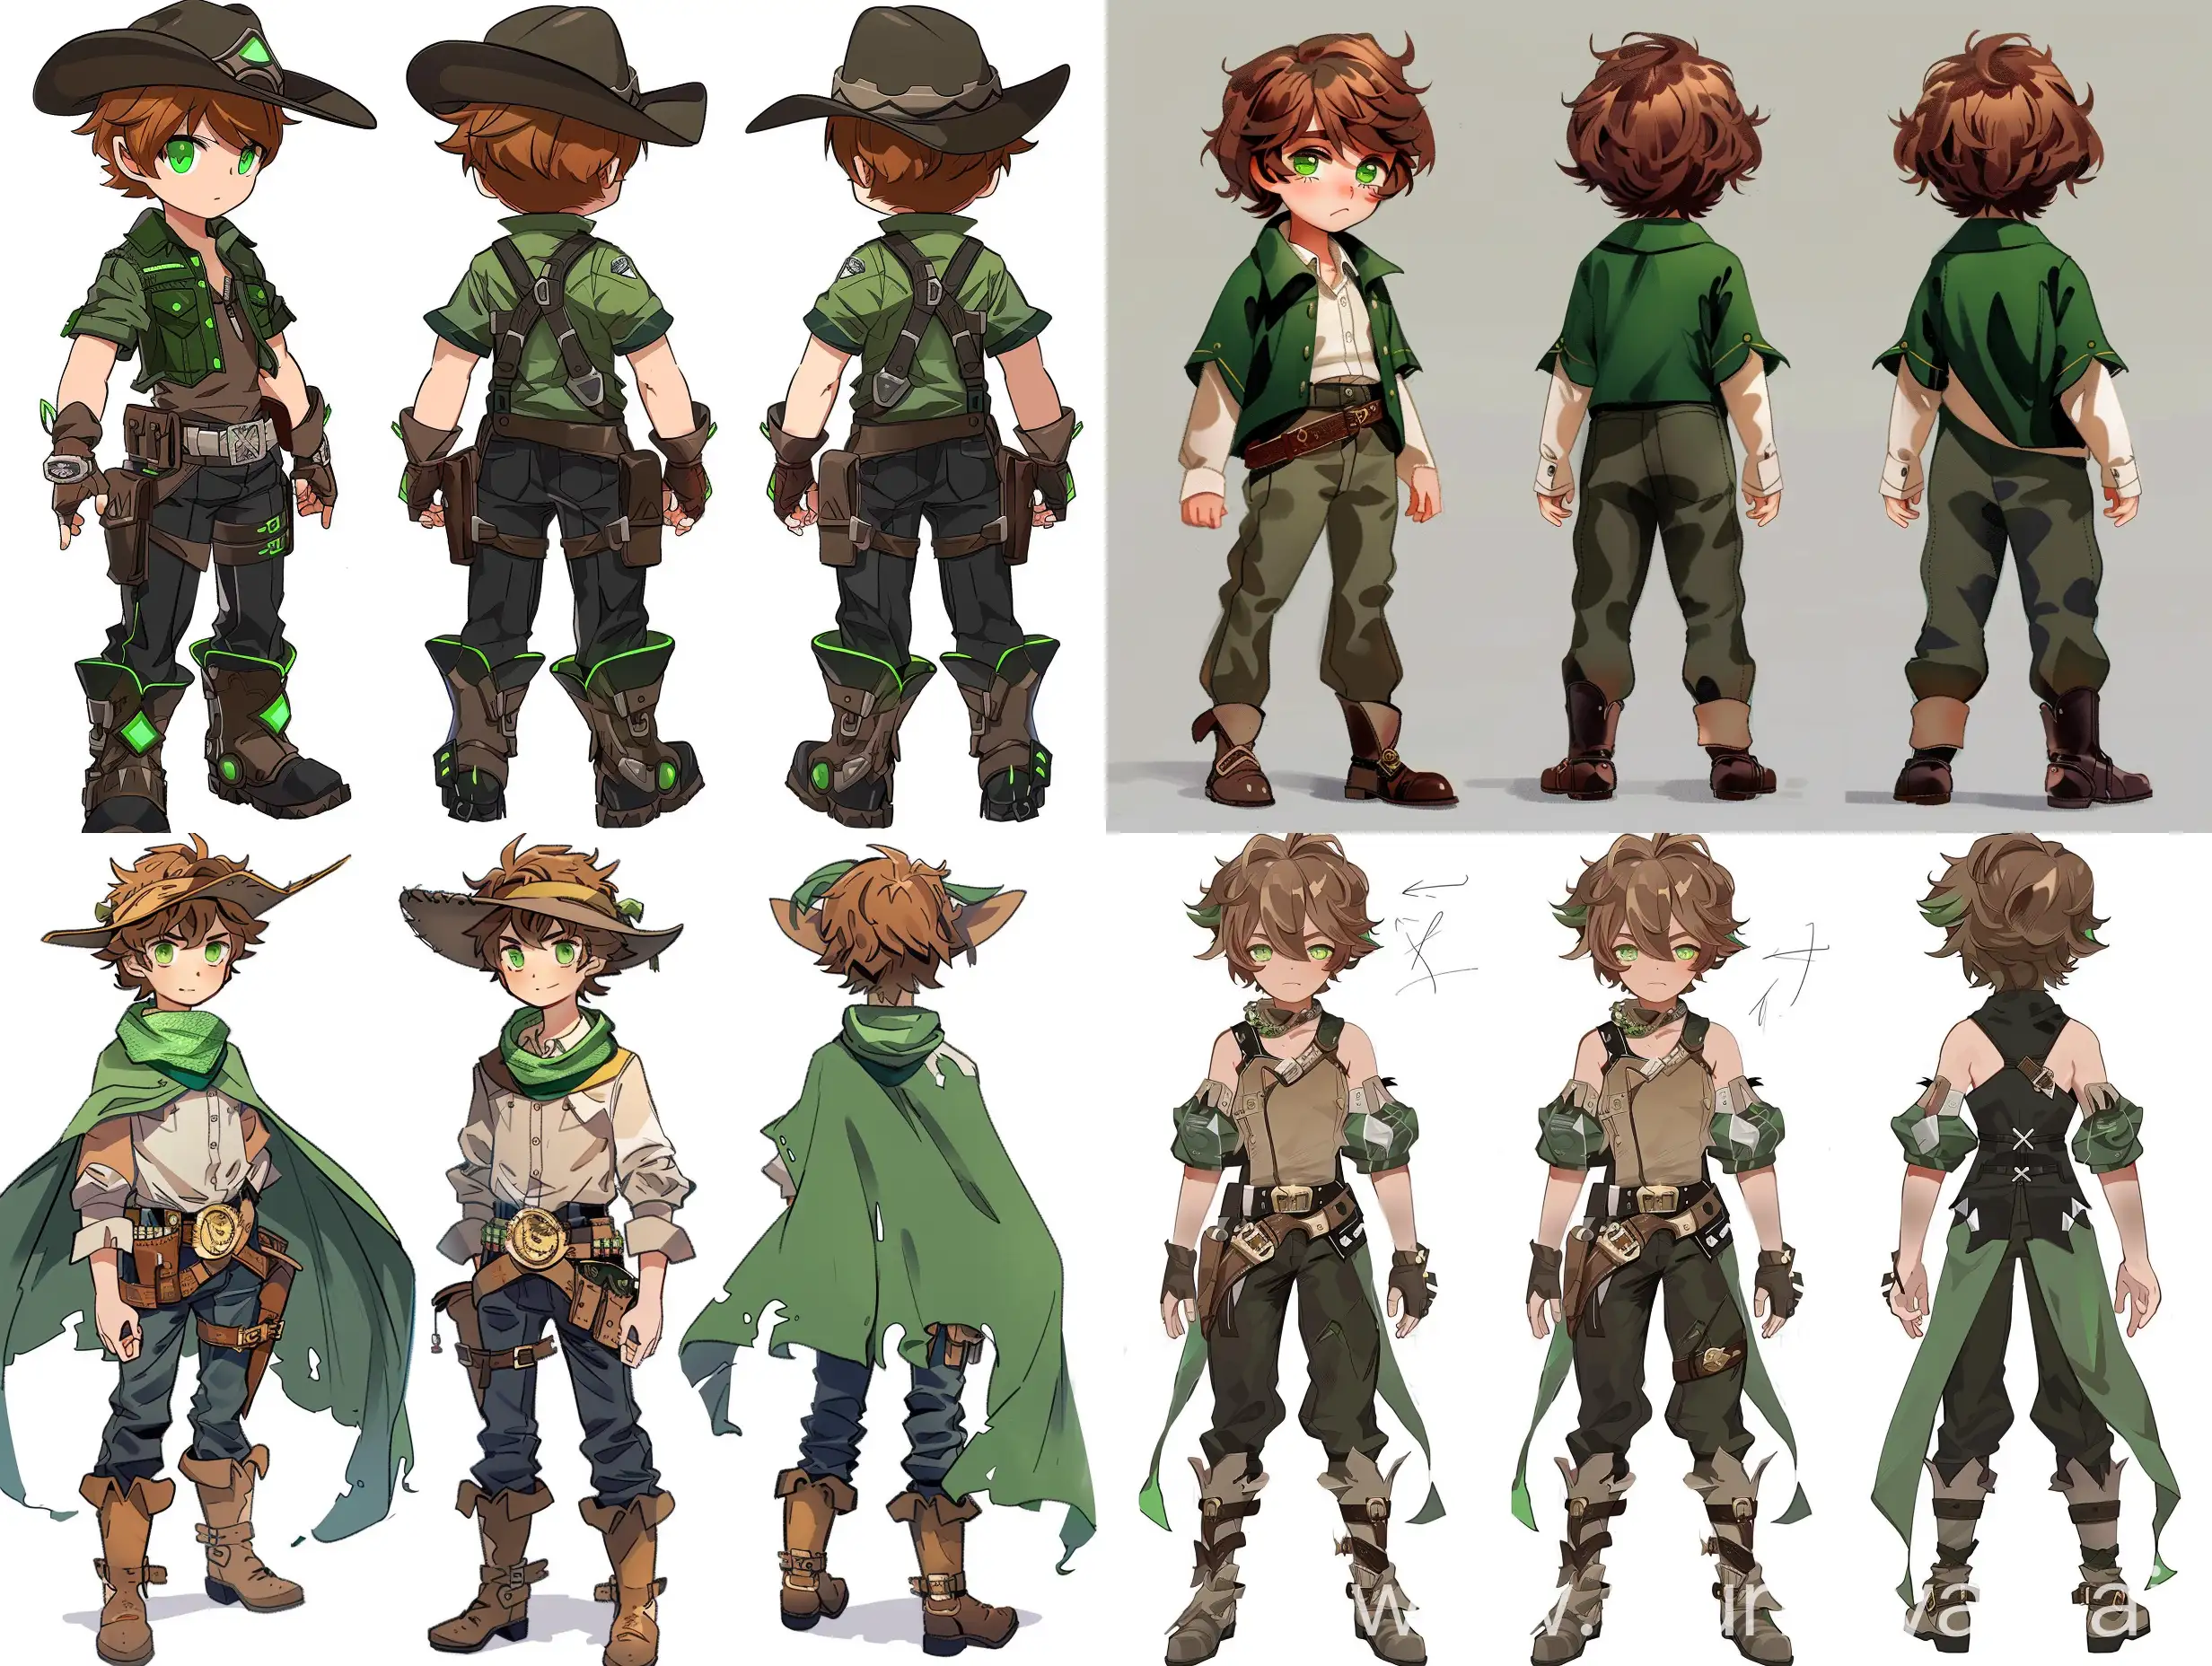 Magical-Boy-Anime-Character-Design-with-Green-and-Black-Theme